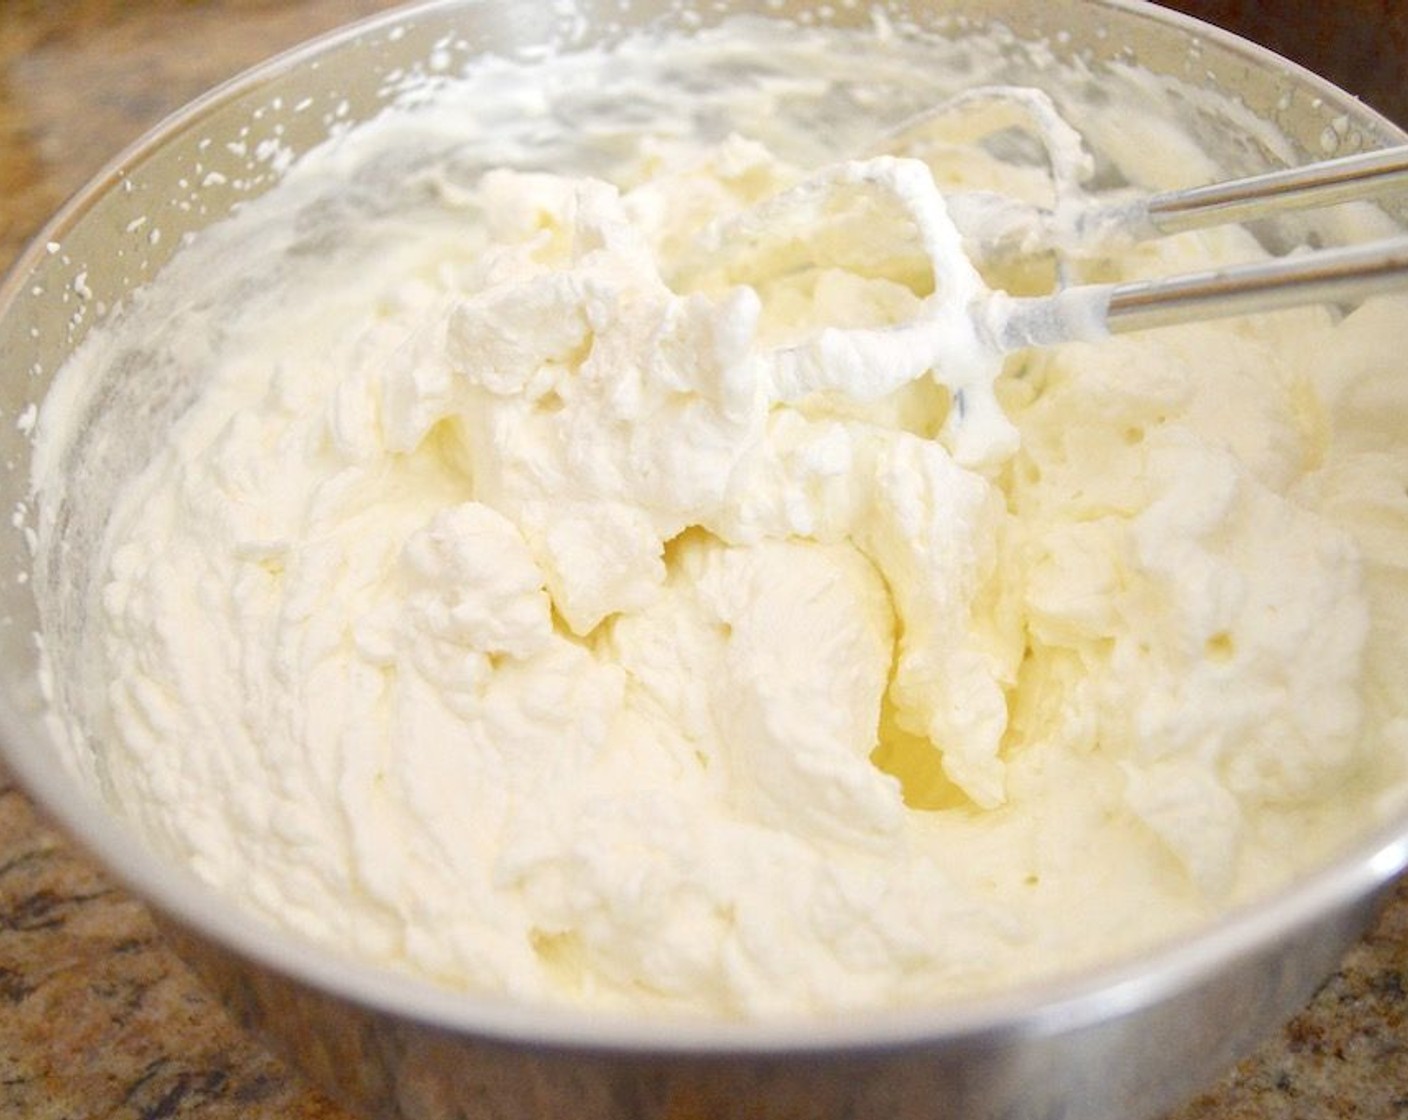 step 10 Make the whipped cream. Combine the Heavy Cream (16 fl oz), Caster Sugar (2 Tbsp), and 1 teaspoons of zest from the Lemon (1) in a mixing bowl and use a hand mixer to whip it up into stiff peaks. It should be airy but not runny at all. Then it is time to assemble this baby!